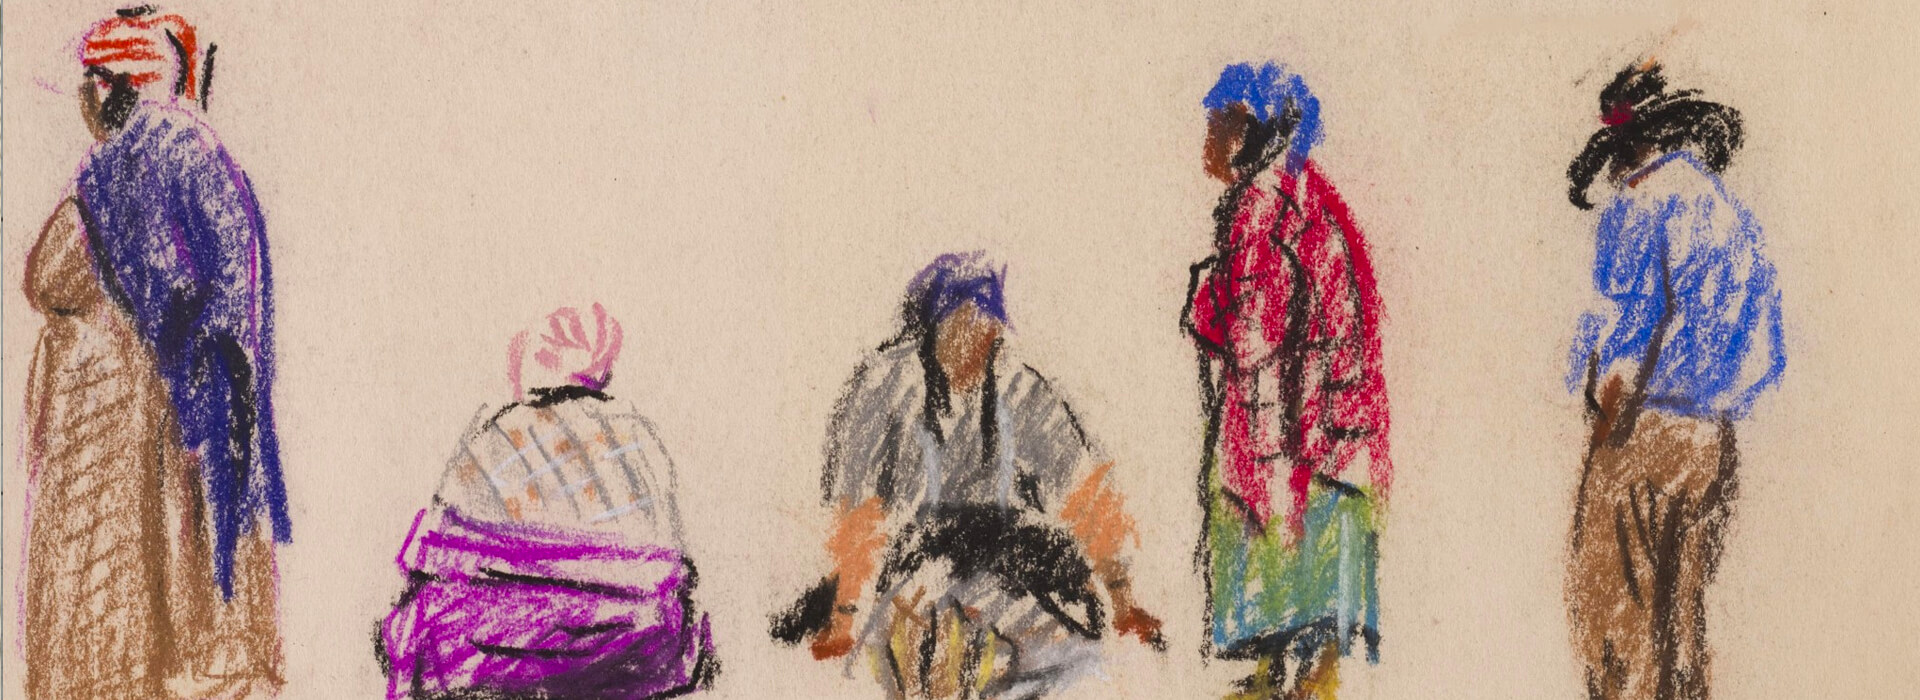 Pastel on paper sketch of people on the Coleville Reservation